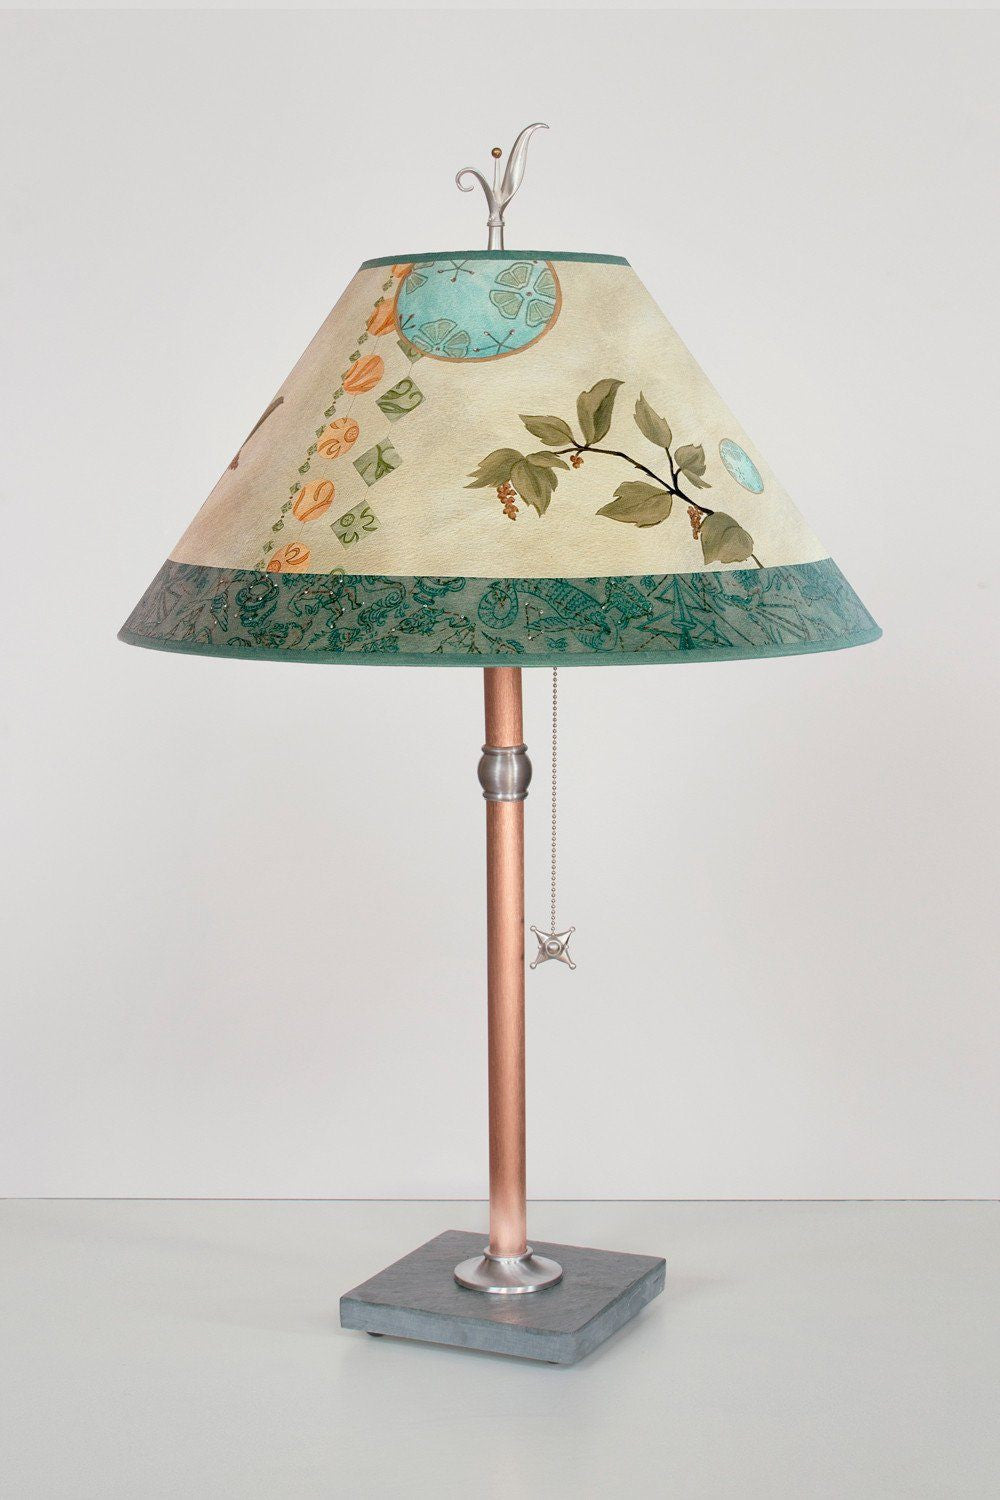 Janna Ugone &amp; Co Table Lamps Copper Table Lamp with Large Conical Shade in Celestial Leaf